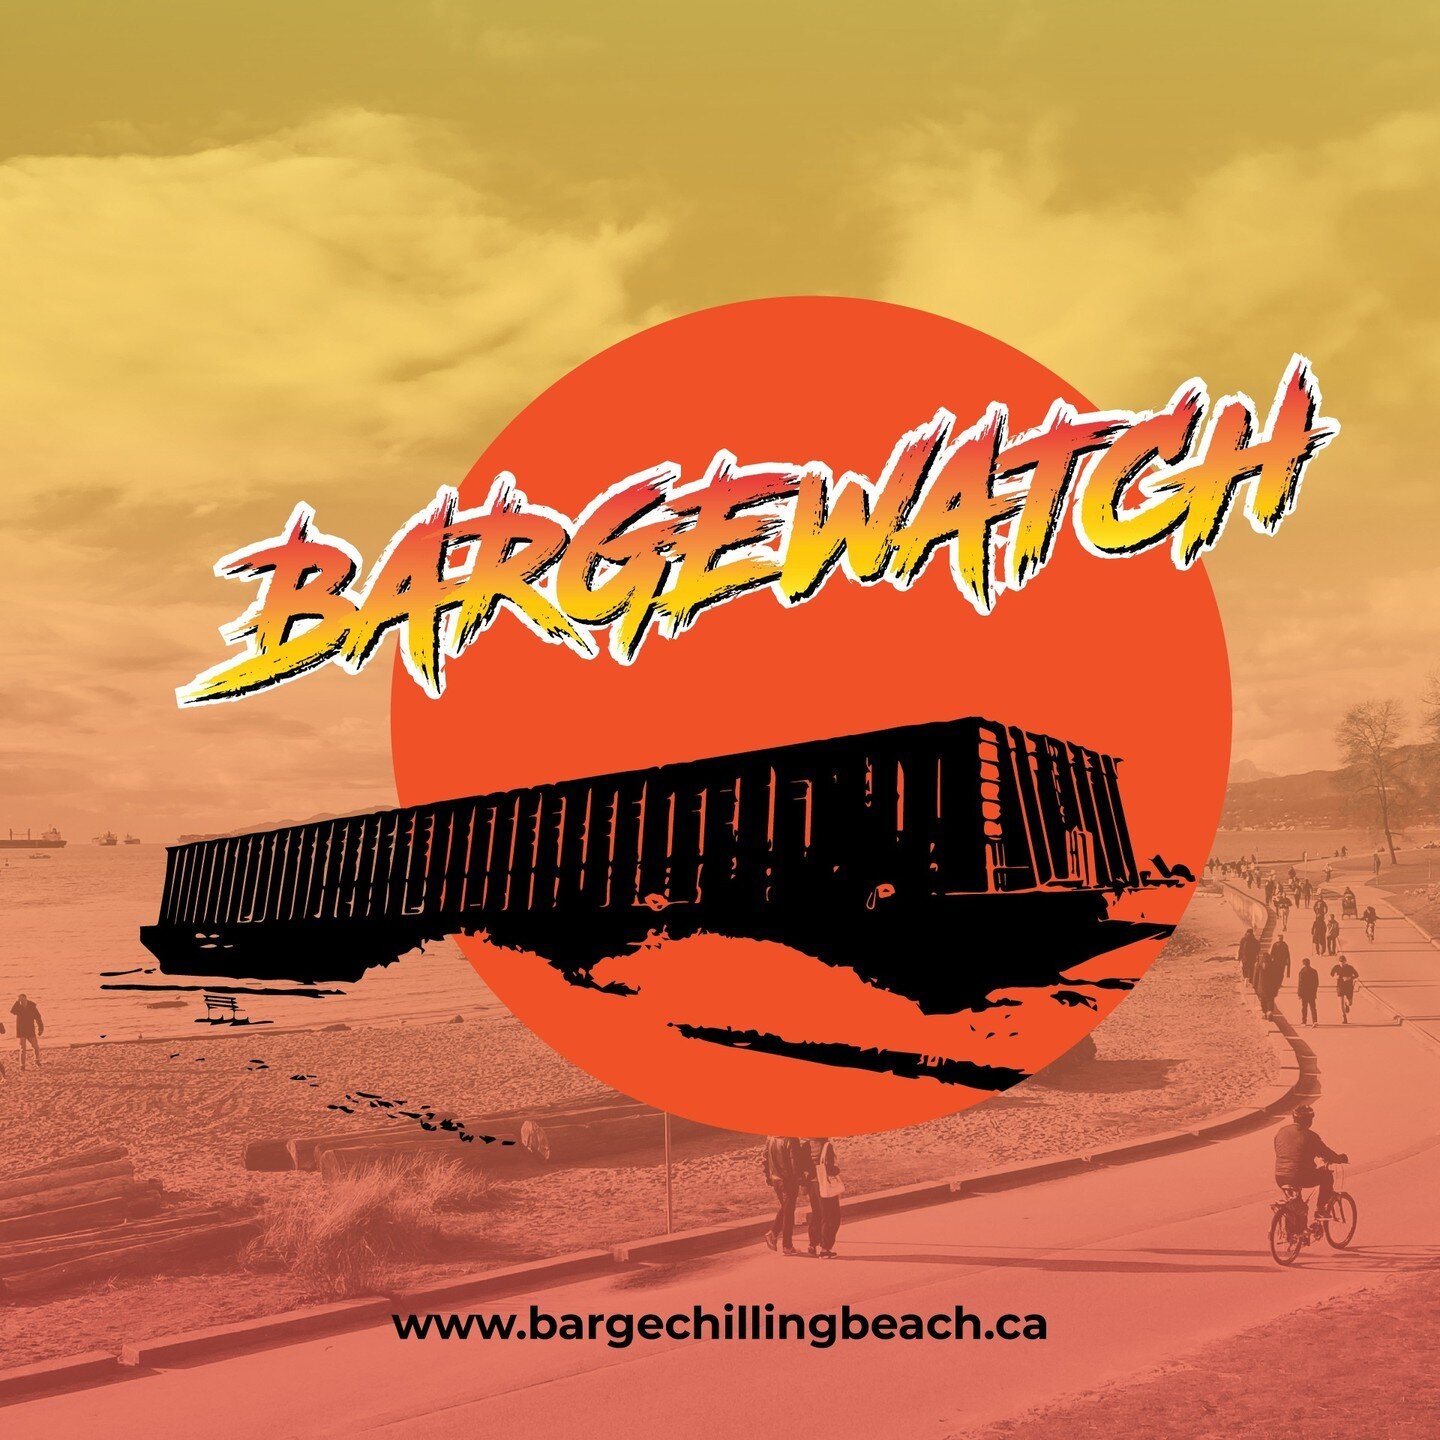 We represent Community, Creativity, Innovation and Challenging the Status .Co so when we see an opportunity to be involved in those values we jump on it!⠀
⠀
http://bargechillingbeach.ca/⠀
⠀
#bargechillingbeach #englishbay #westend #vancouver #support